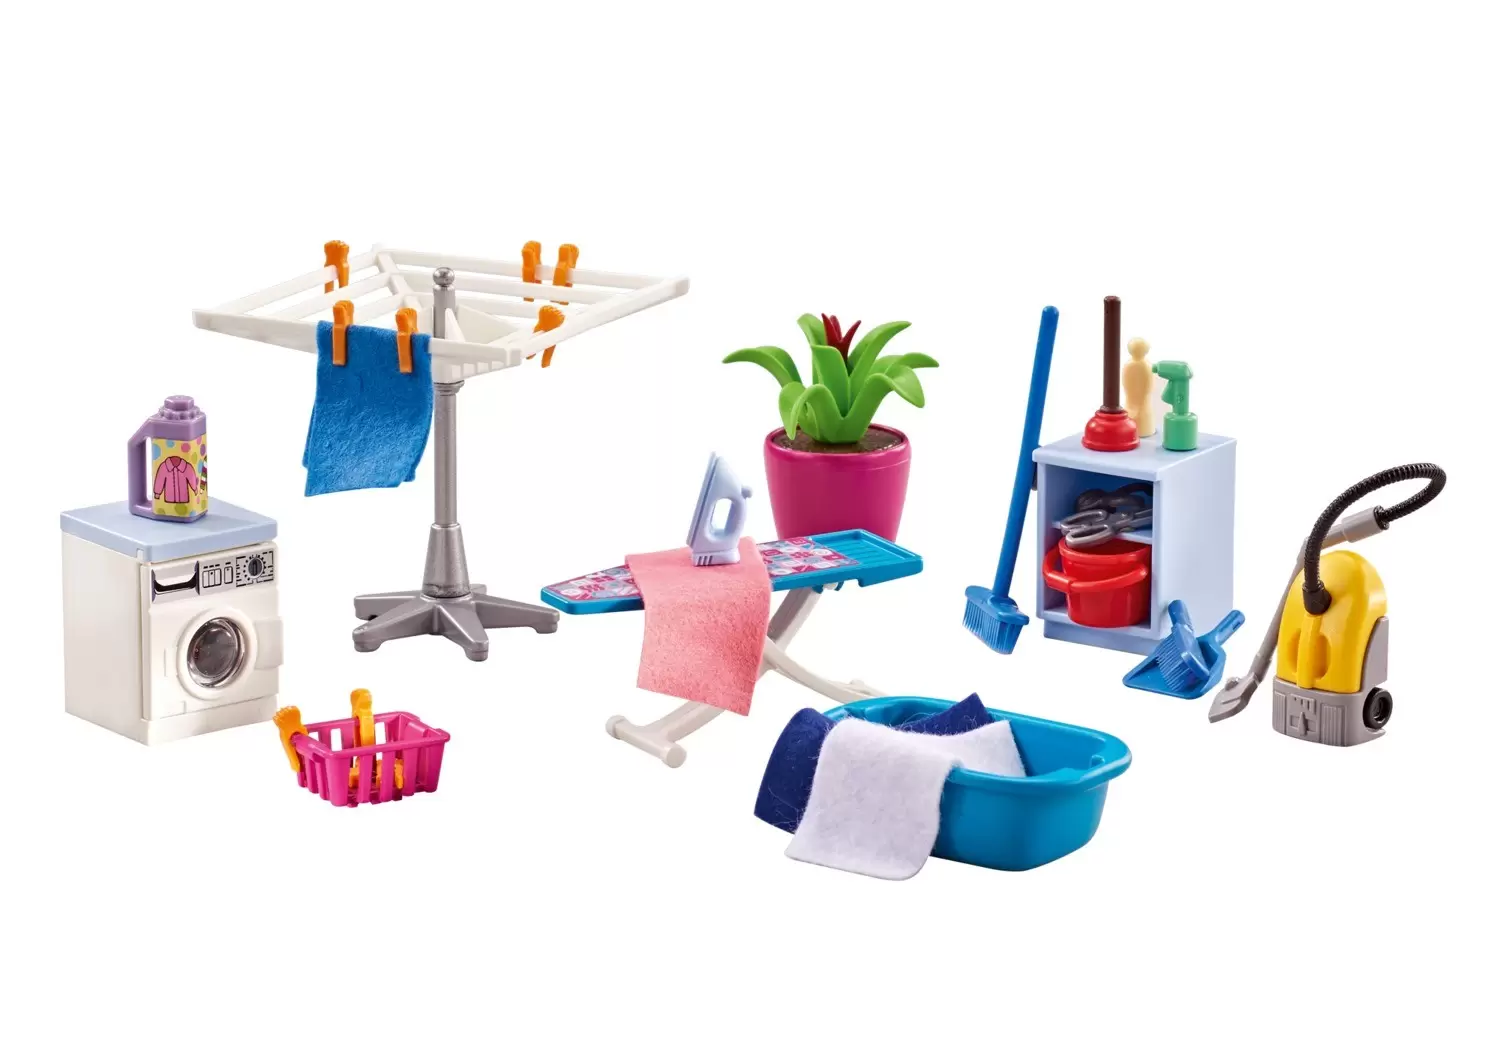 Playmobil Houses and Furniture - Laundry room kit